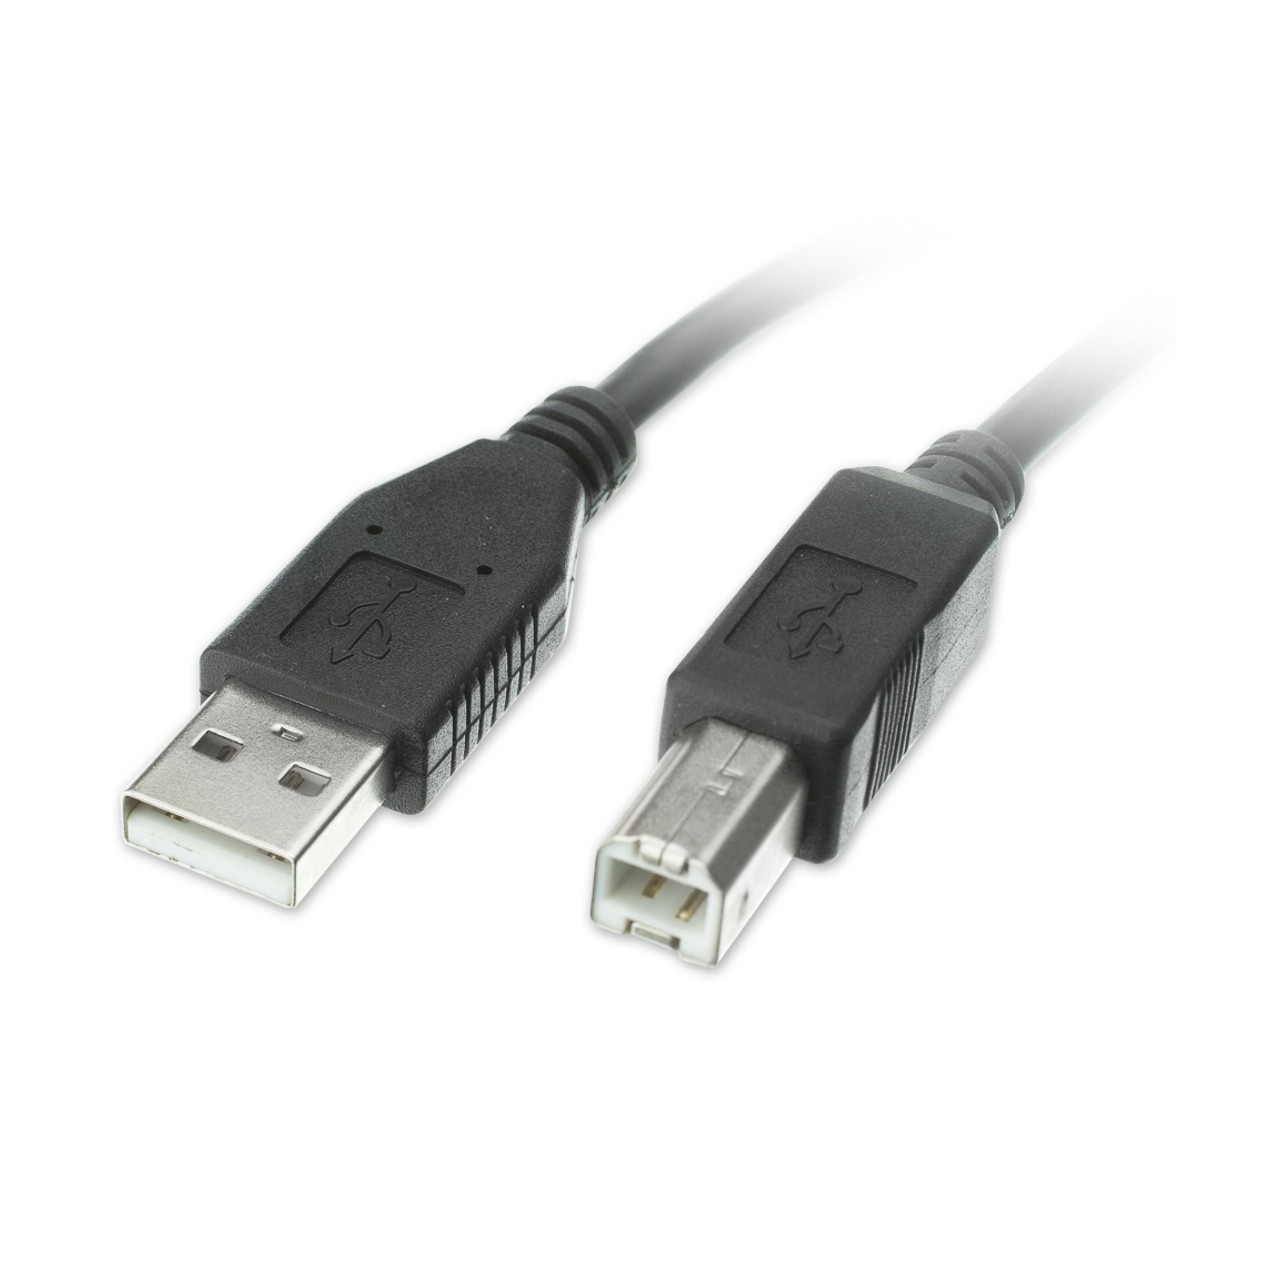 Cable - USB A Male to USB B Male 30cm